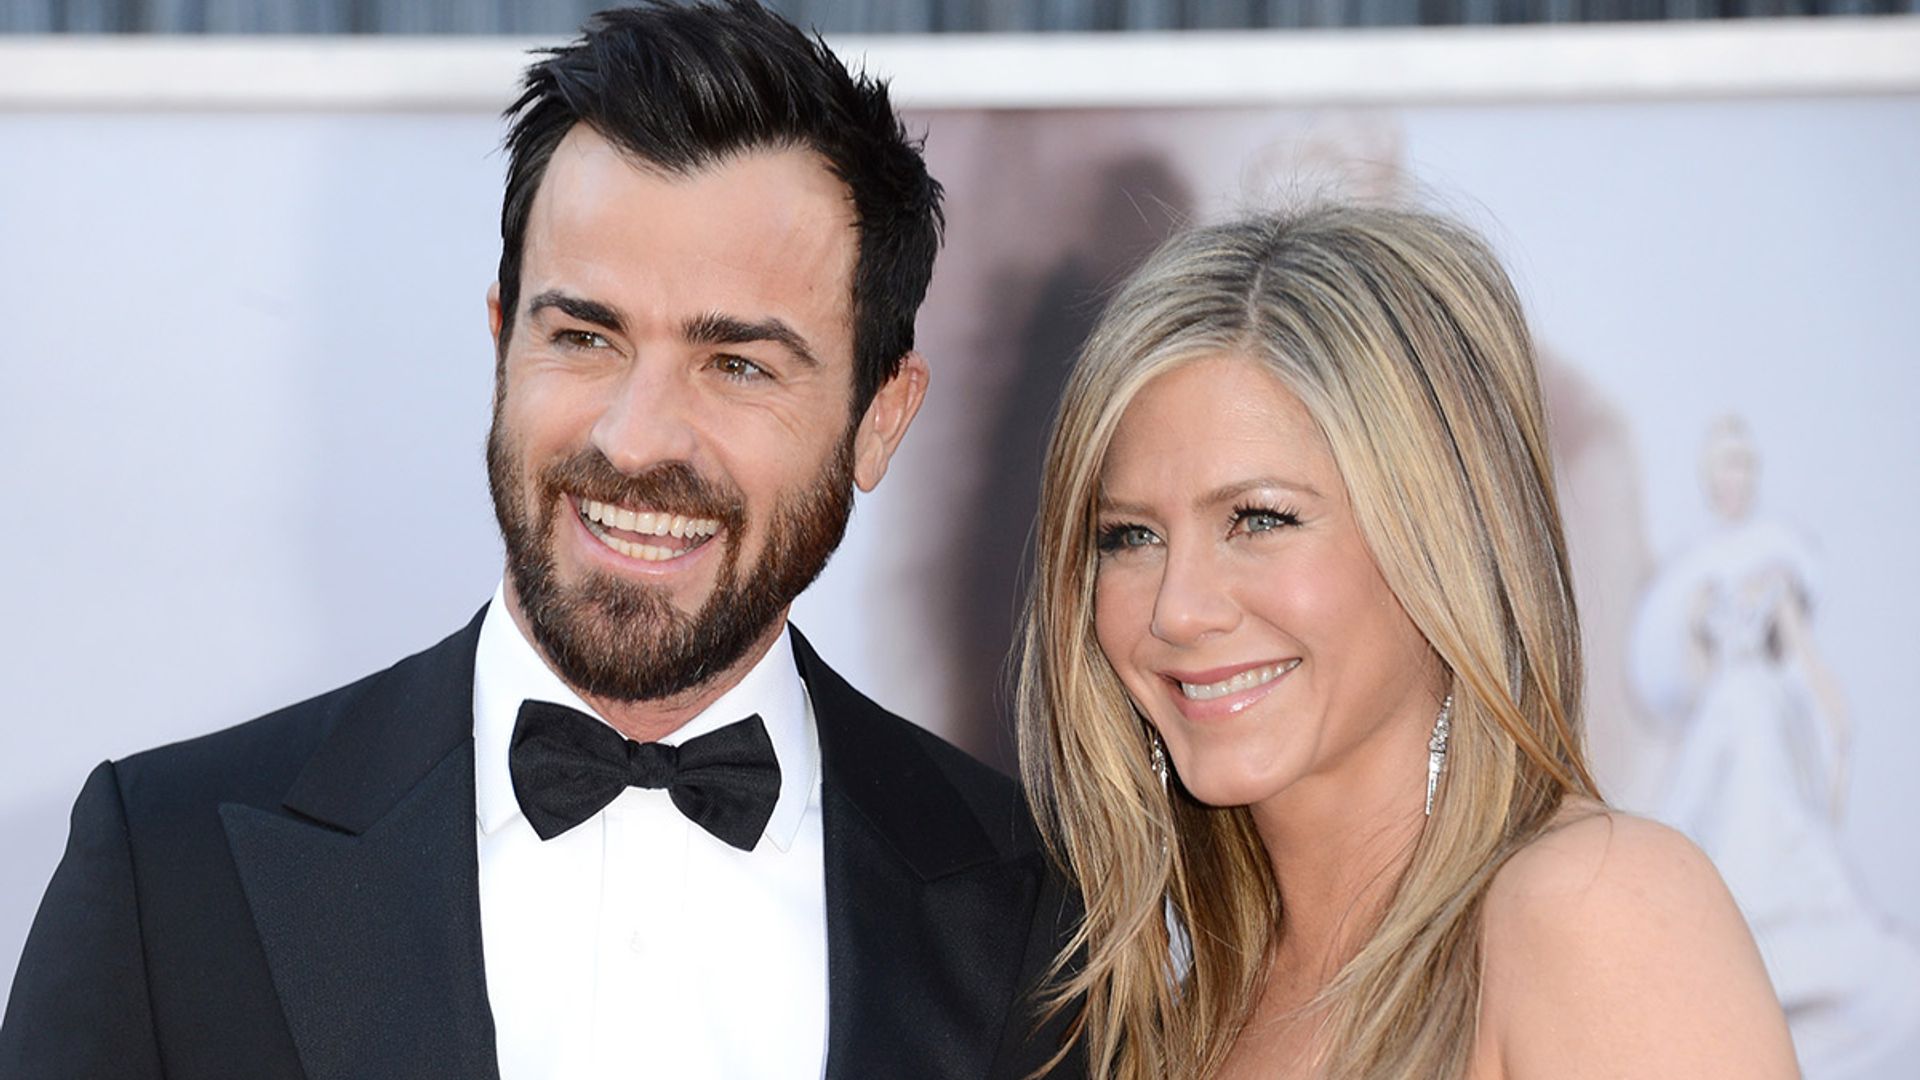 Jennifer Aniston shows her support for ex Justin Theroux in sweetest way